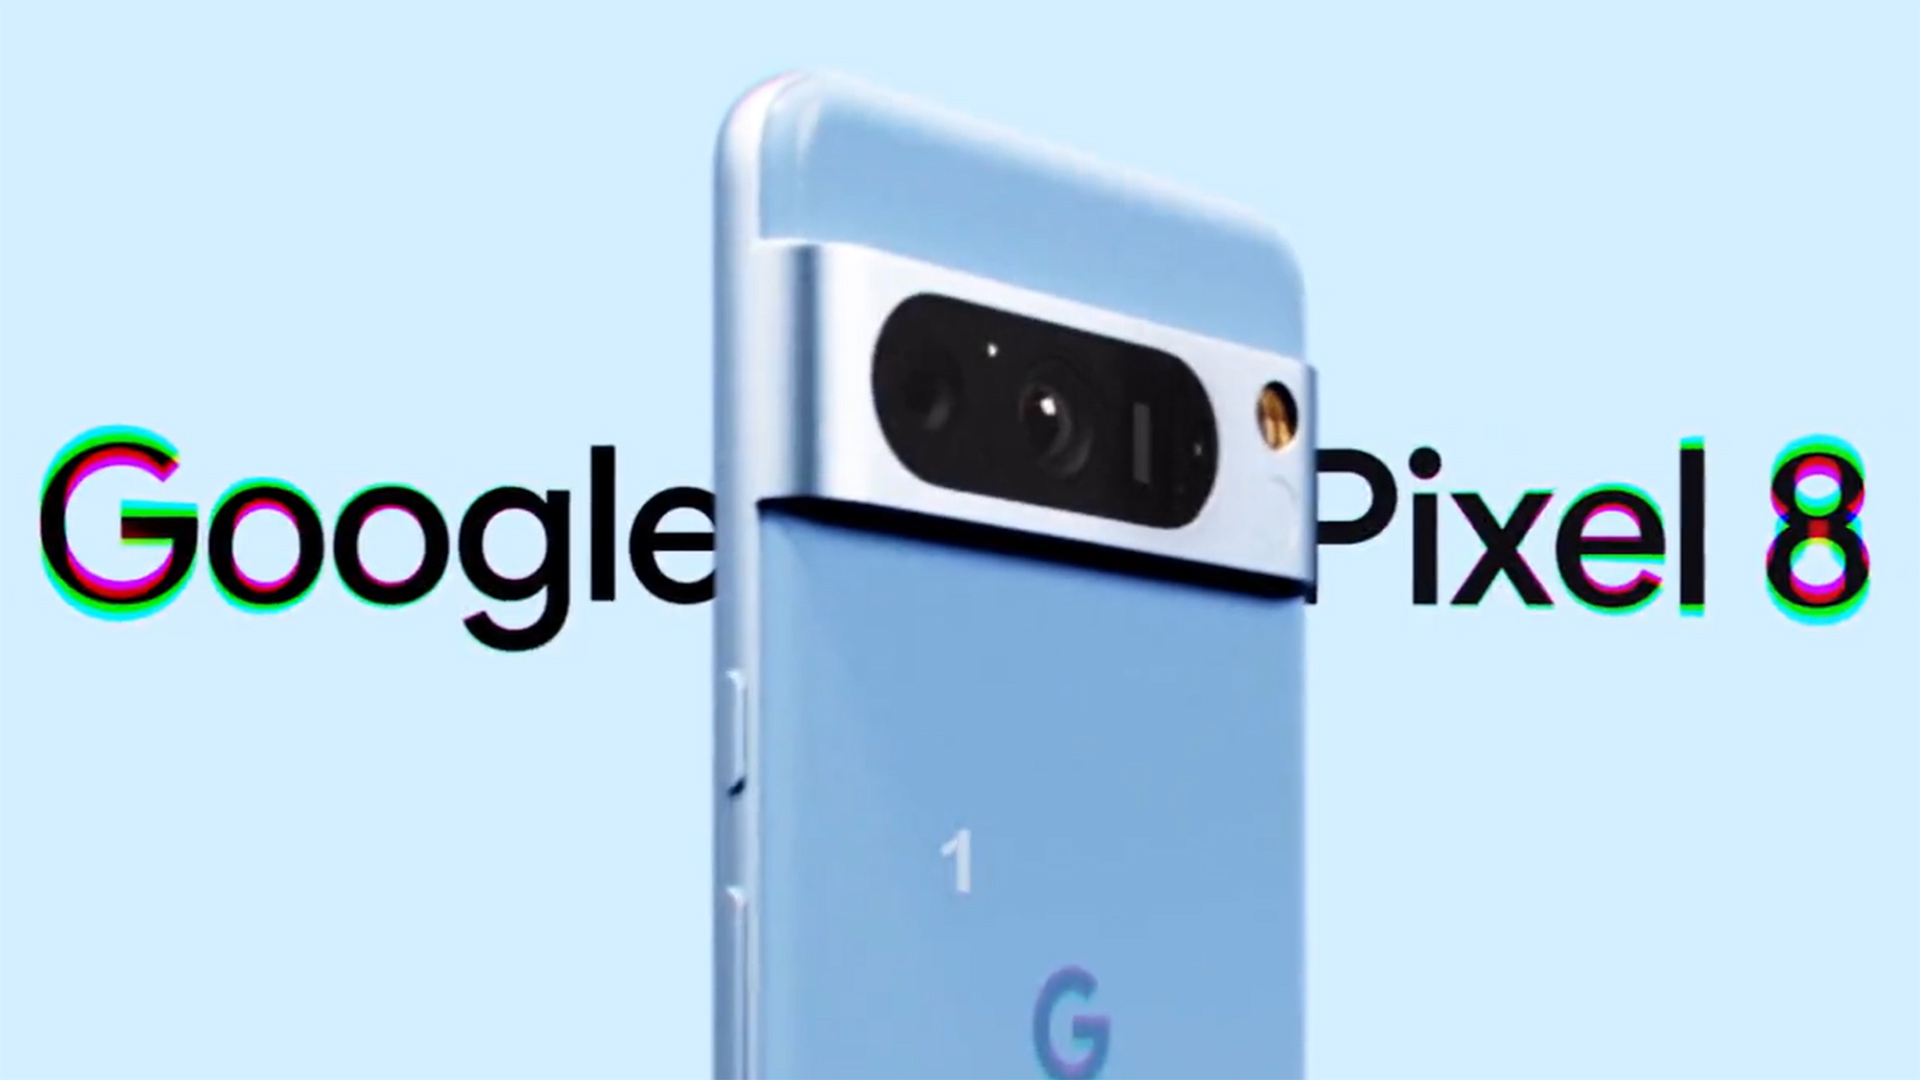 Google Pixel 8 Pro leaks again with new color, feature - Android Authority